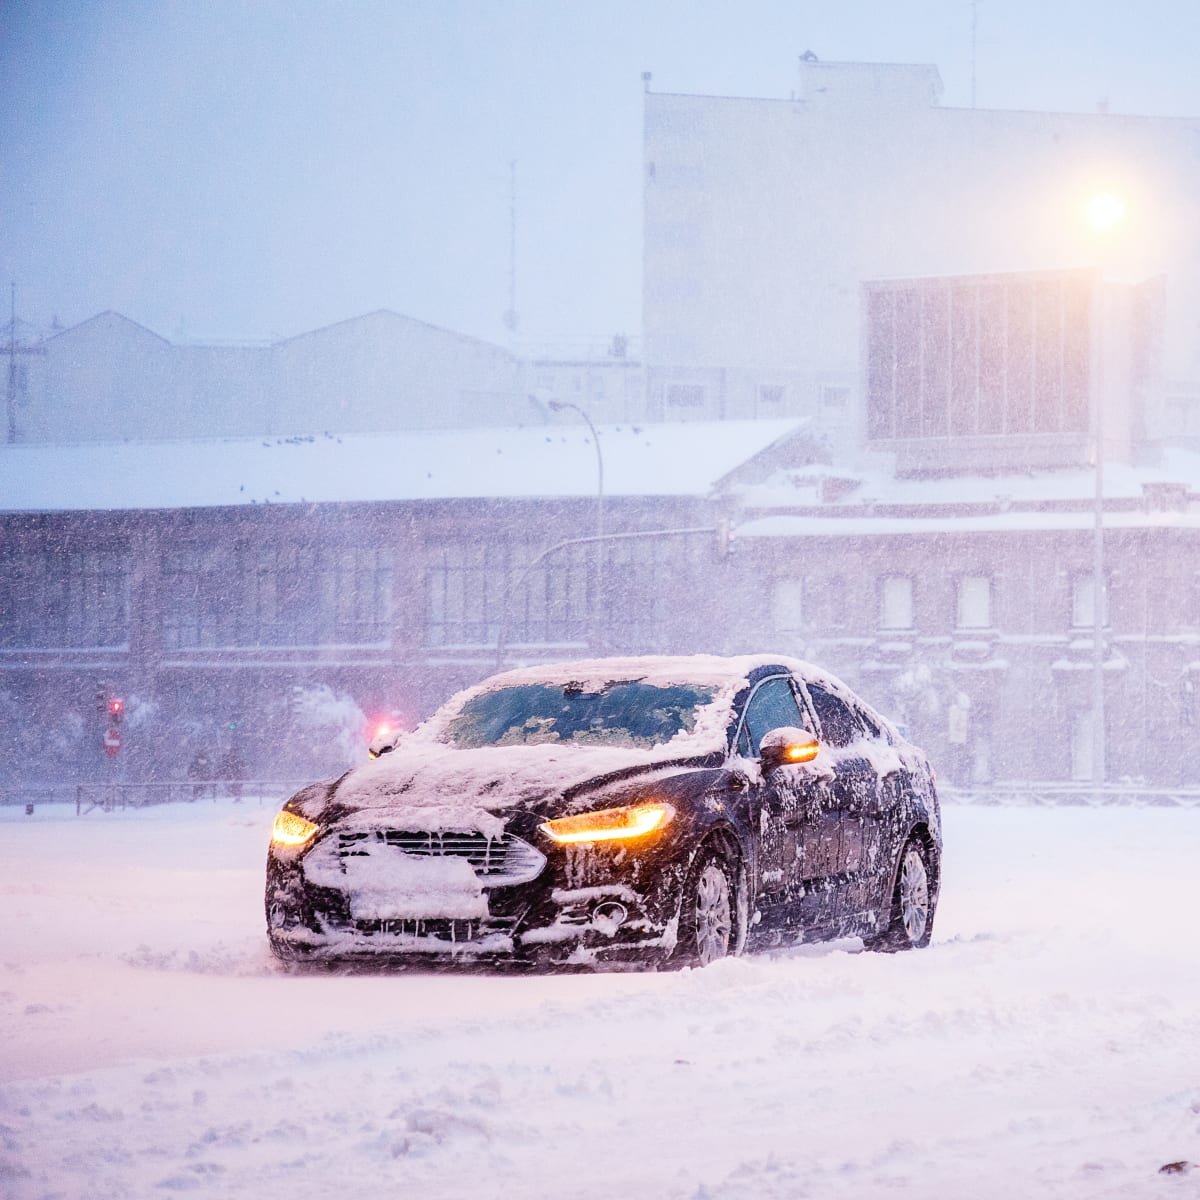 How to Build a Winter Emergency Kit for Your Car